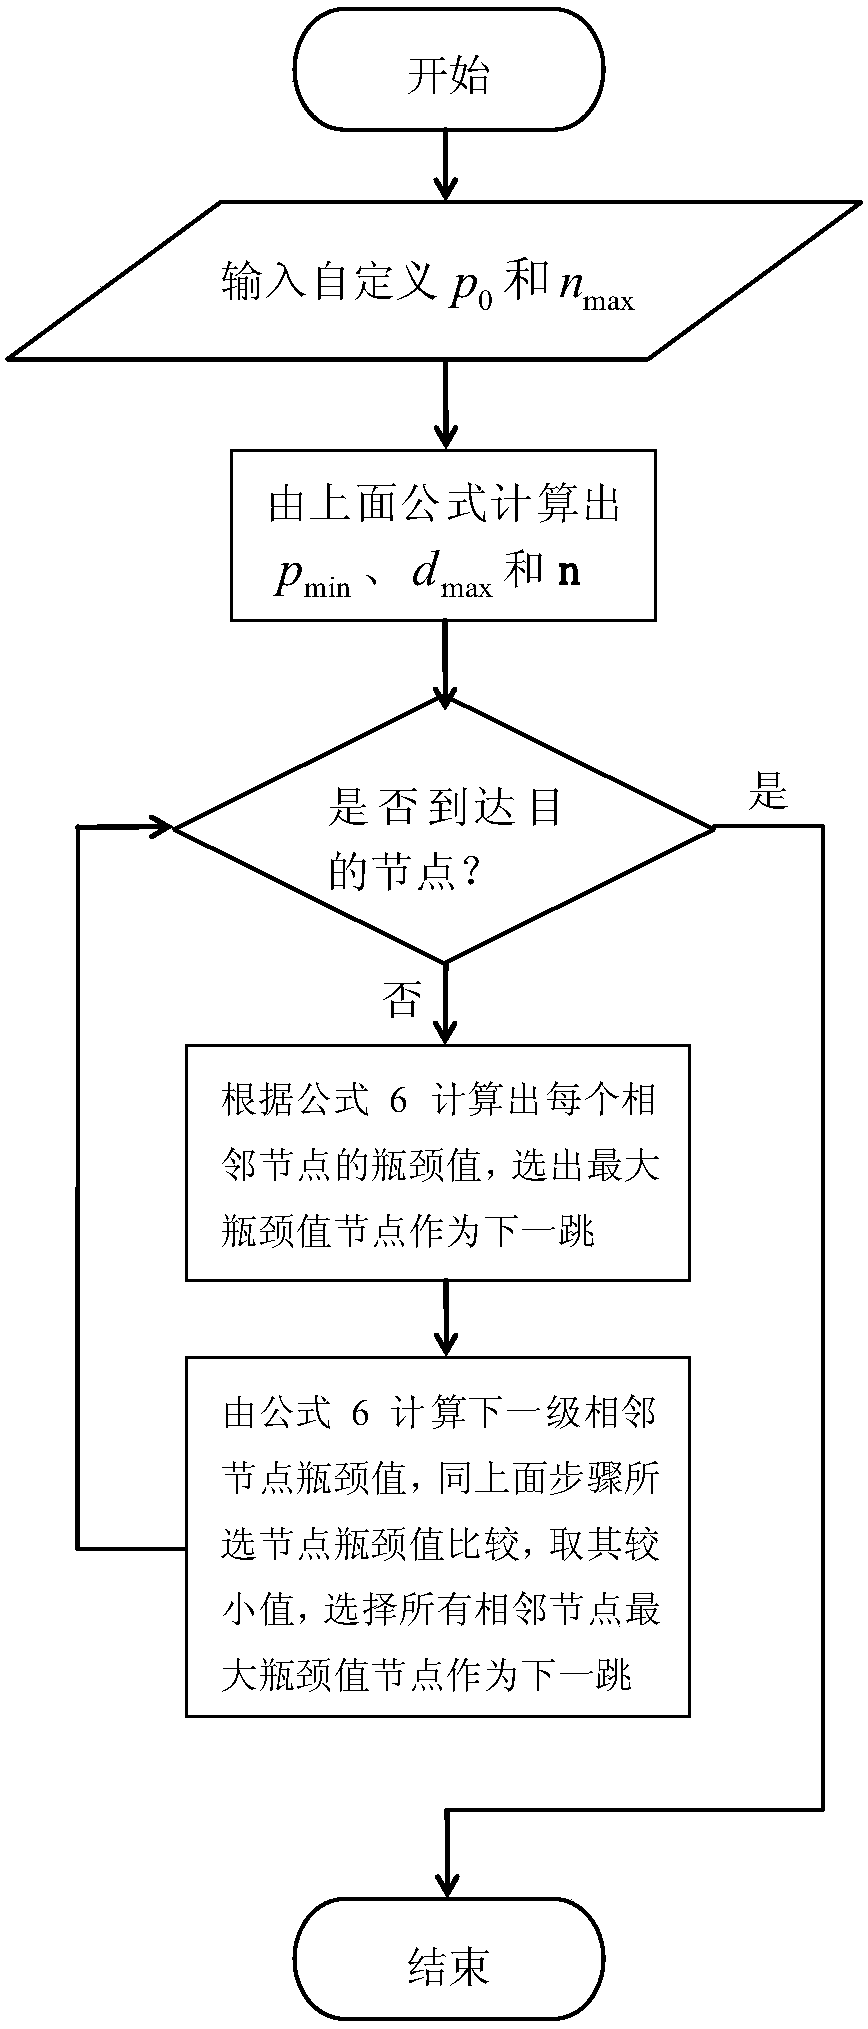 Energy priority routing method based on extended transmission distance and retransmission